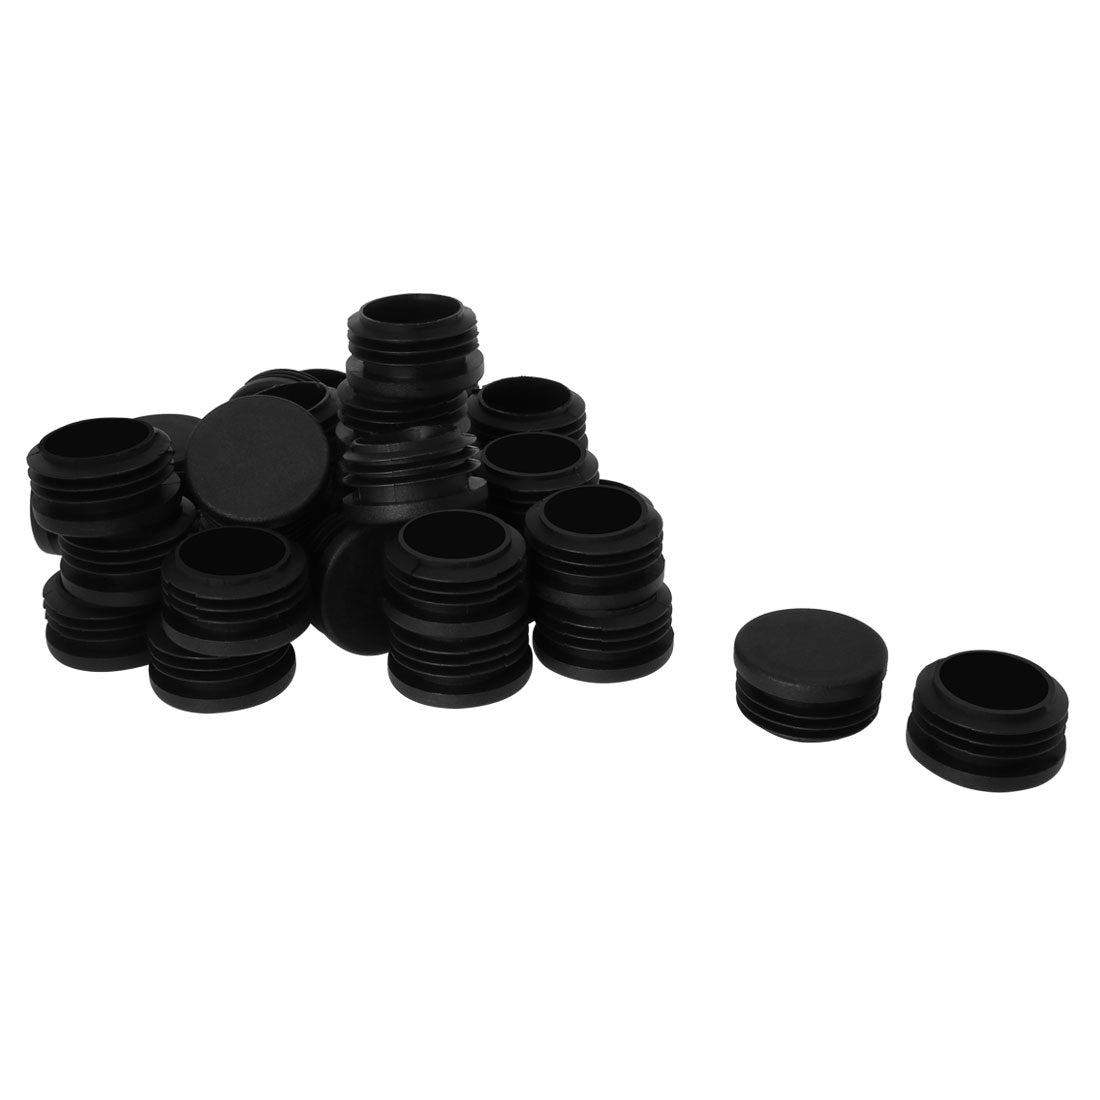 Uxcell Uxcell 1 1/4 " 1.26" OD Plastic Round Tube Insert Glide End Cap Pad 36pcs 1.14"-1.22" Inner Dia for Office Furniture Table Anti Scratch